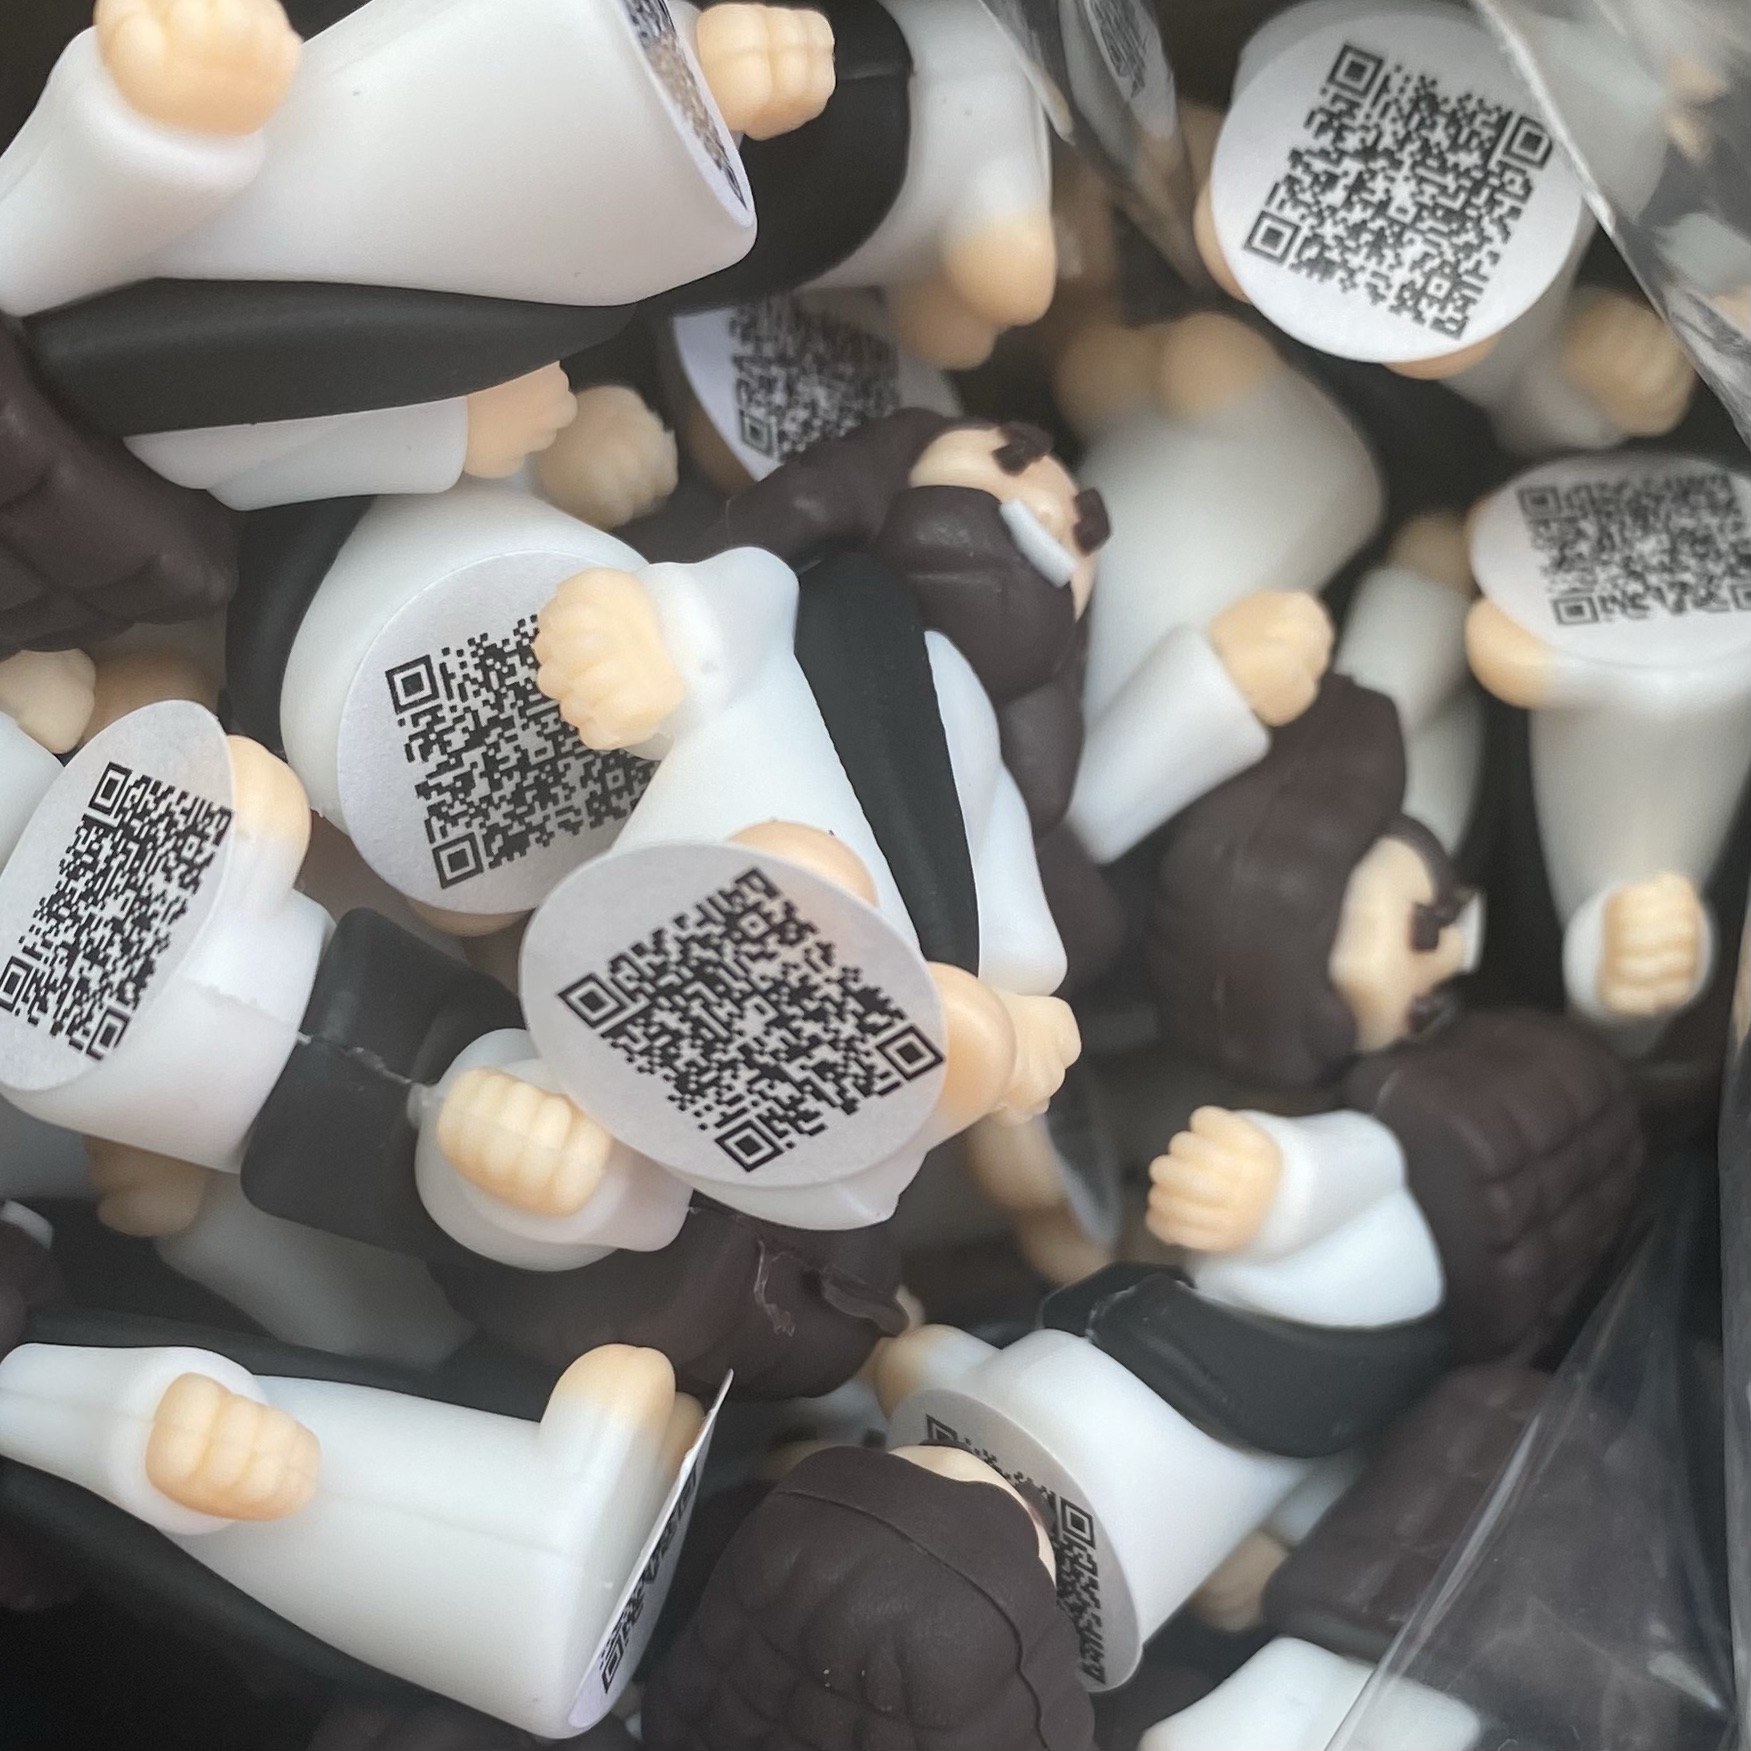 I put a tiny QR code on the bottom of the Mini Jesus figures (Little Jesus Figures). It takes you to my blog post on this:
#MiniJesus #LittleJesus 

https://www.courageouschristianfather.com/hiding-mini-jesus-figurines/